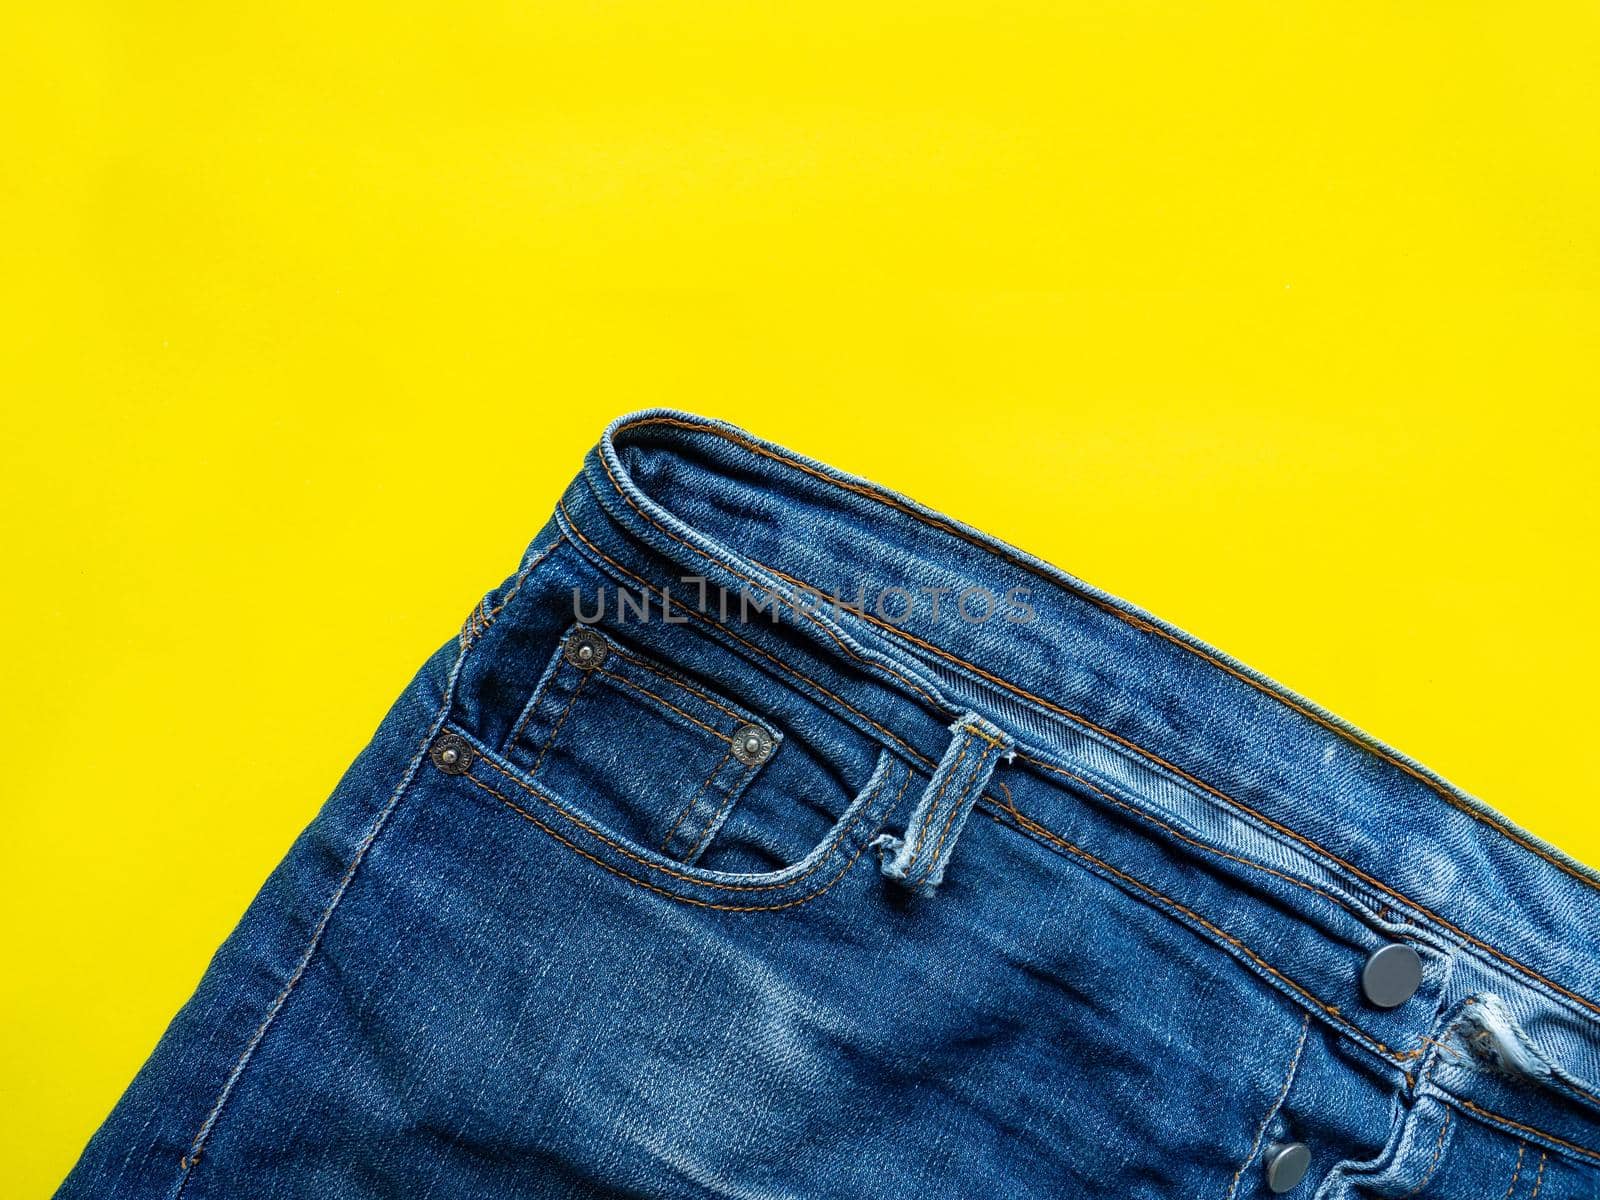 Blue pants Saw the fine pattern of the fabric Put on a yellow background by Kulpreya